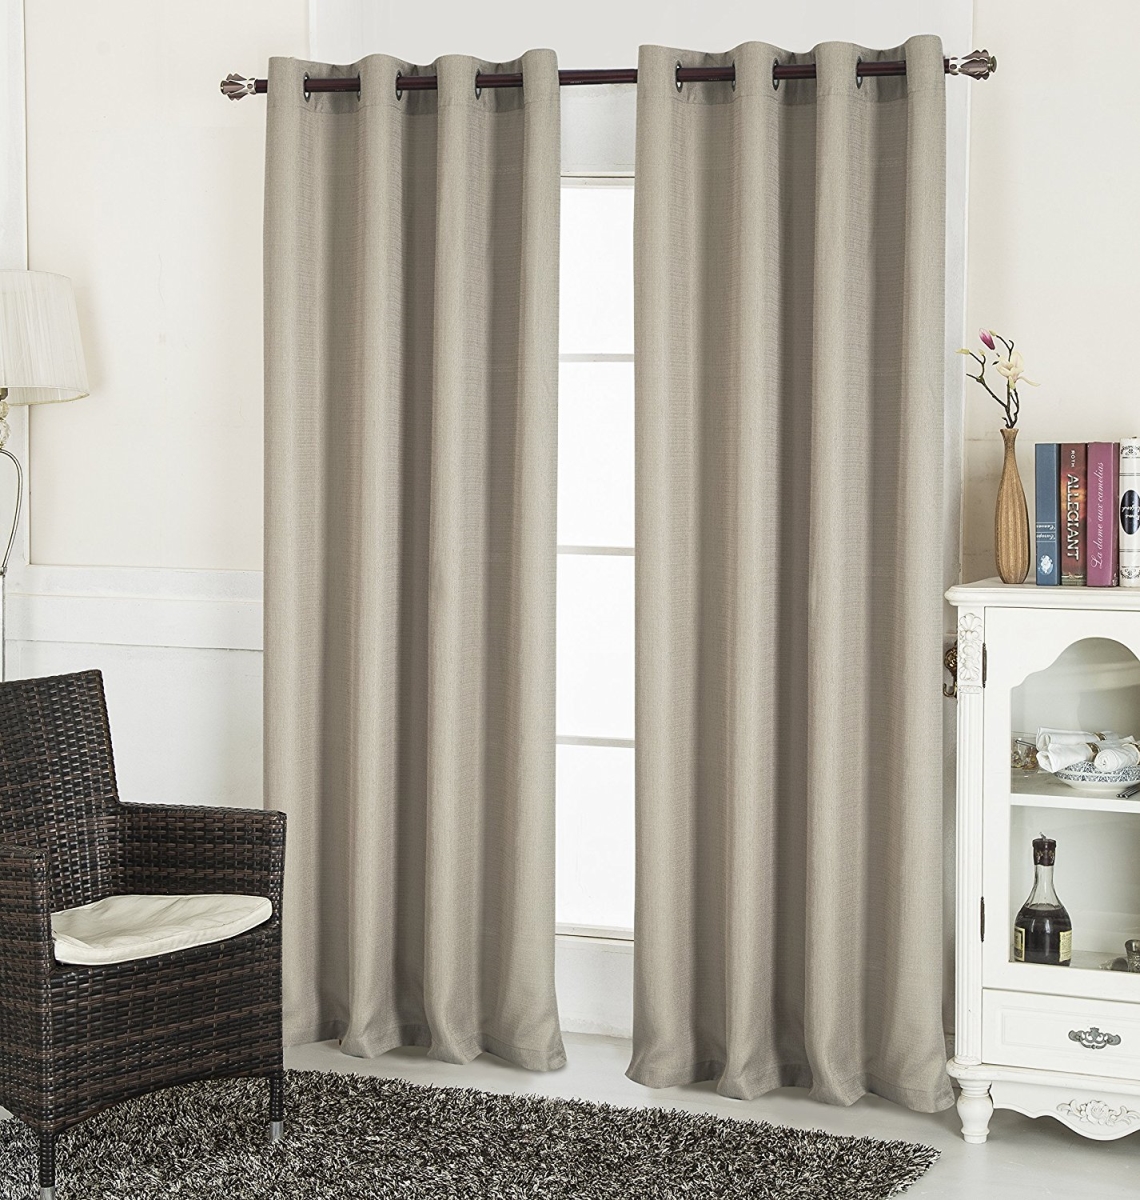 Pnl02190 Layne Textured 54 X 90 In. Grommet Curtain Panel, Taupe